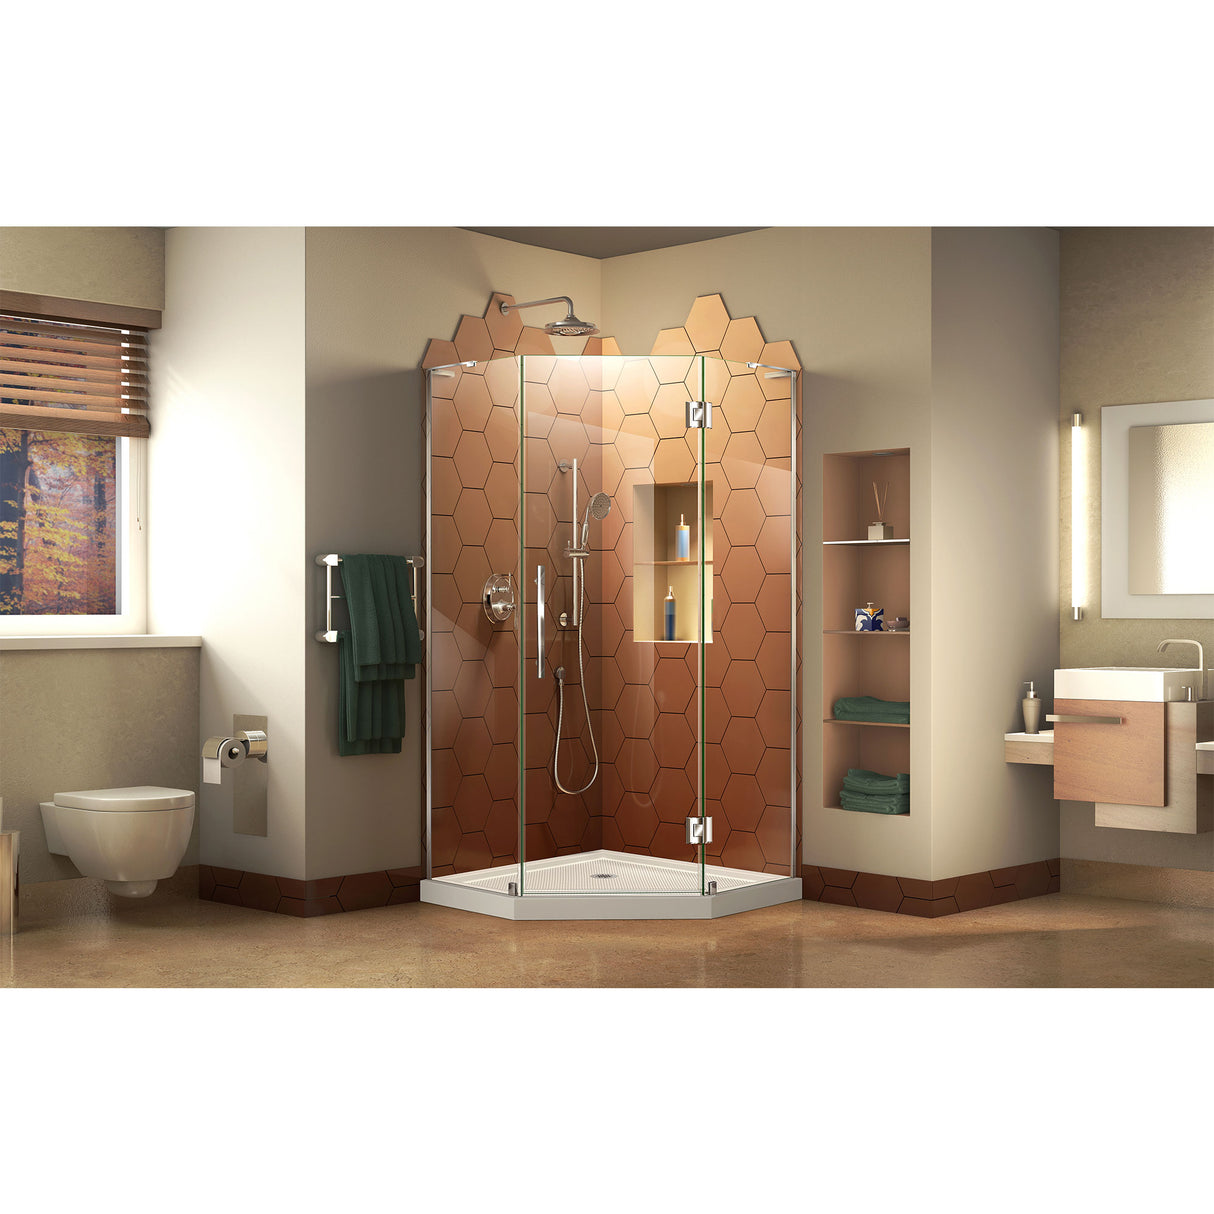 DreamLine Prism Plus 36 in. x 74 3/4 in. Frameless Neo-Angle Shower Enclosure in Chrome with White Base